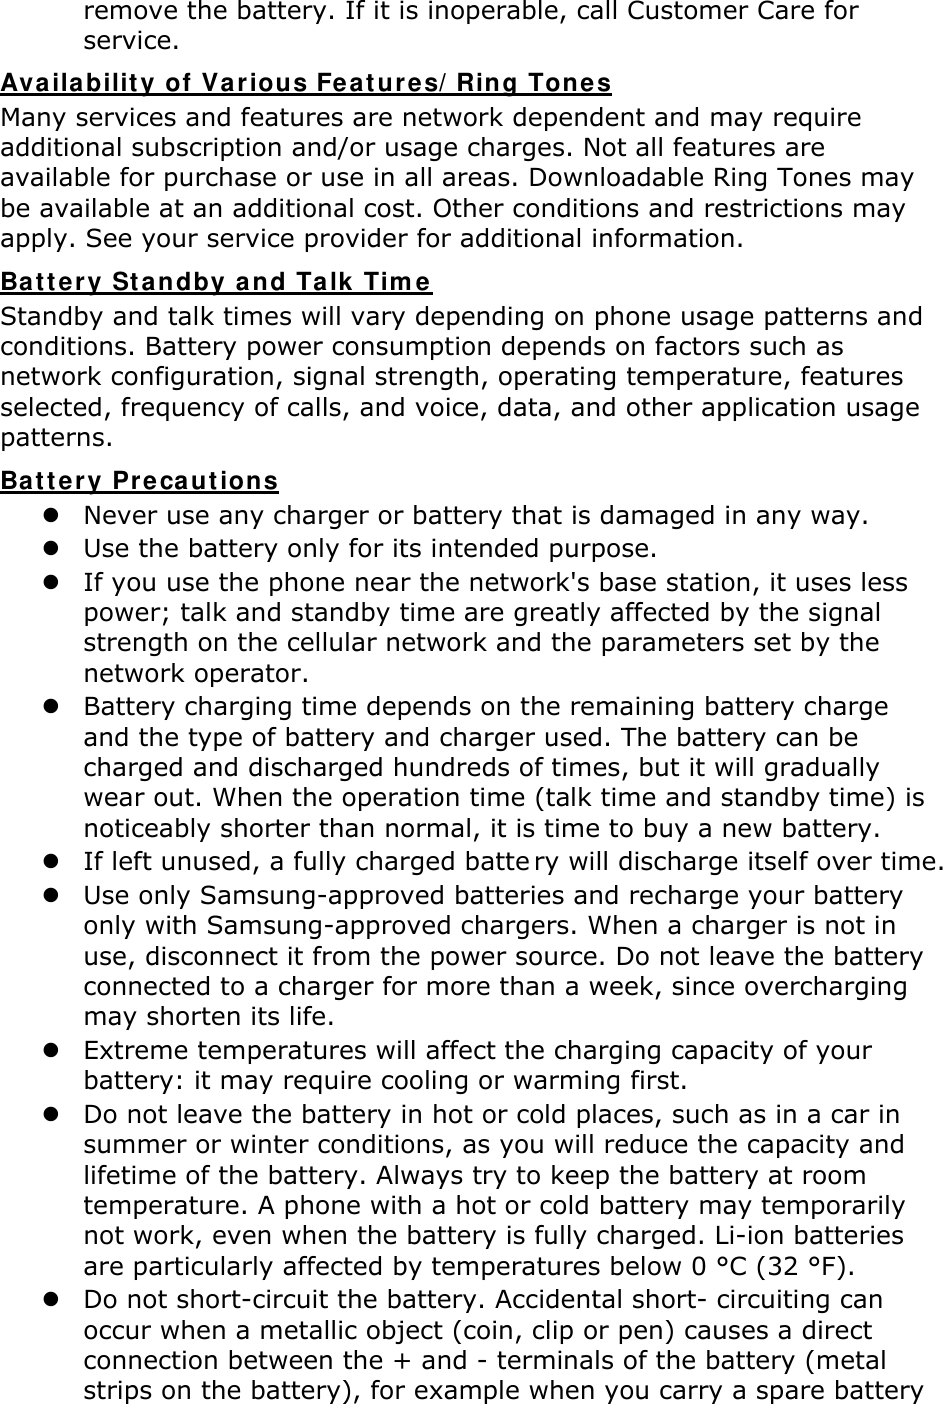 remove the battery. If it is inoperable, call Customer Care for service. Availability of Various Features/Ring Tones Many services and features are network dependent and may require additional subscription and/or usage charges. Not all features are available for purchase or use in all areas. Downloadable Ring Tones may be available at an additional cost. Other conditions and restrictions may apply. See your service provider for additional information. Battery Standby and Talk Time Standby and talk times will vary depending on phone usage patterns and conditions. Battery power consumption depends on factors such as network configuration, signal strength, operating temperature, features selected, frequency of calls, and voice, data, and other application usage patterns.   Battery Precautions z Never use any charger or battery that is damaged in any way. z Use the battery only for its intended purpose. z If you use the phone near the network&apos;s base station, it uses less power; talk and standby time are greatly affected by the signal strength on the cellular network and the parameters set by the network operator. z Battery charging time depends on the remaining battery charge and the type of battery and charger used. The battery can be charged and discharged hundreds of times, but it will gradually wear out. When the operation time (talk time and standby time) is noticeably shorter than normal, it is time to buy a new battery. z If left unused, a fully charged batte ry will discharge itself over time.  z Use only Samsung-approved batteries and recharge your battery only with Samsung-approved chargers. When a charger is not in use, disconnect it from the power source. Do not leave the battery connected to a charger for more than a week, since overcharging may shorten its life. z Extreme temperatures will affect the charging capacity of your battery: it may require cooling or warming first. z Do not leave the battery in hot or cold places, such as in a car in summer or winter conditions, as you will reduce the capacity and lifetime of the battery. Always try to keep the battery at room temperature. A phone with a hot or cold battery may temporarily not work, even when the battery is fully charged. Li-ion batteries are particularly affected by temperatures below 0 °C (32 °F). z Do not short-circuit the battery. Accidental short- circuiting can occur when a metallic object (coin, clip or pen) causes a direct connection between the + and - terminals of the battery (metal strips on the battery), for example when you carry a spare battery 